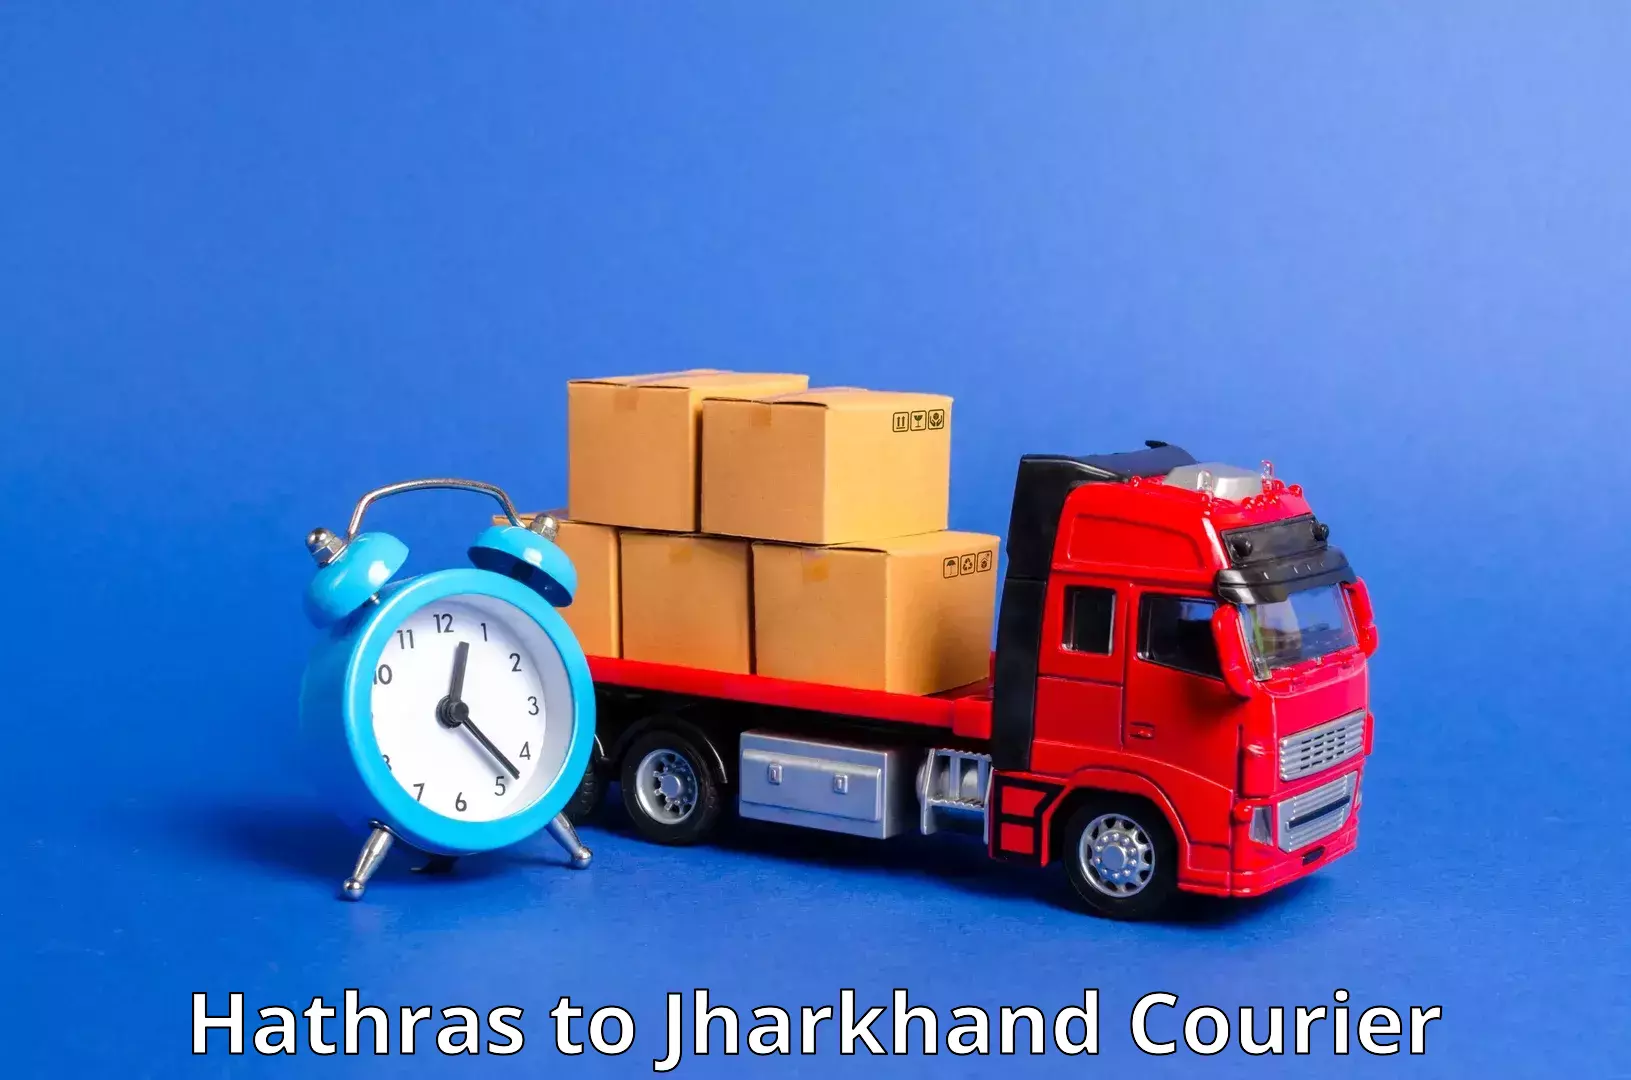 Optimized shipping routes Hathras to Chandil